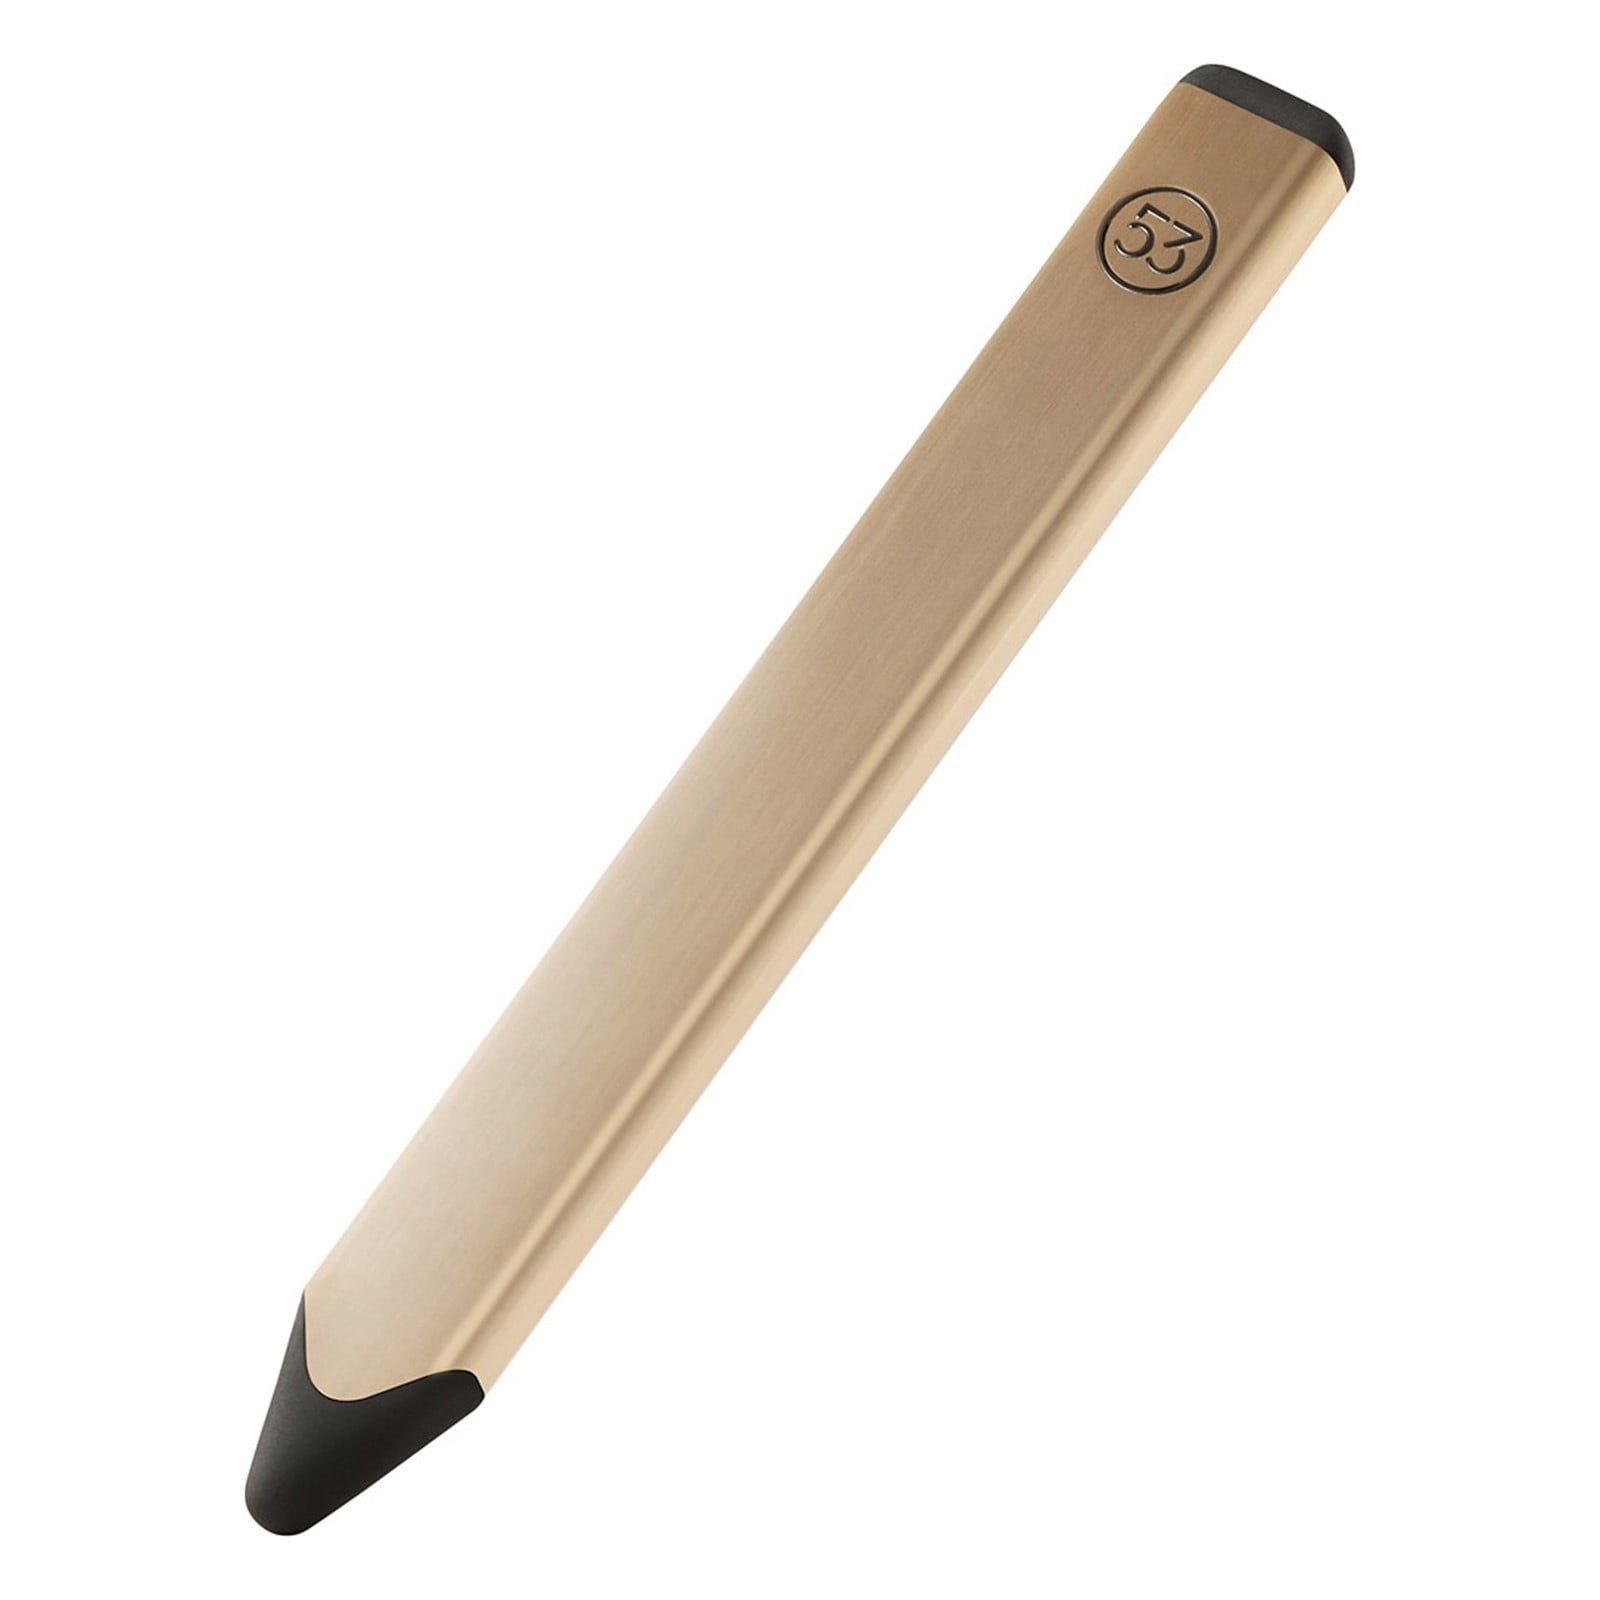 FiftyThree 53PW06 Pencil Digital Stylus for iPad iPad Pro and iPhone 